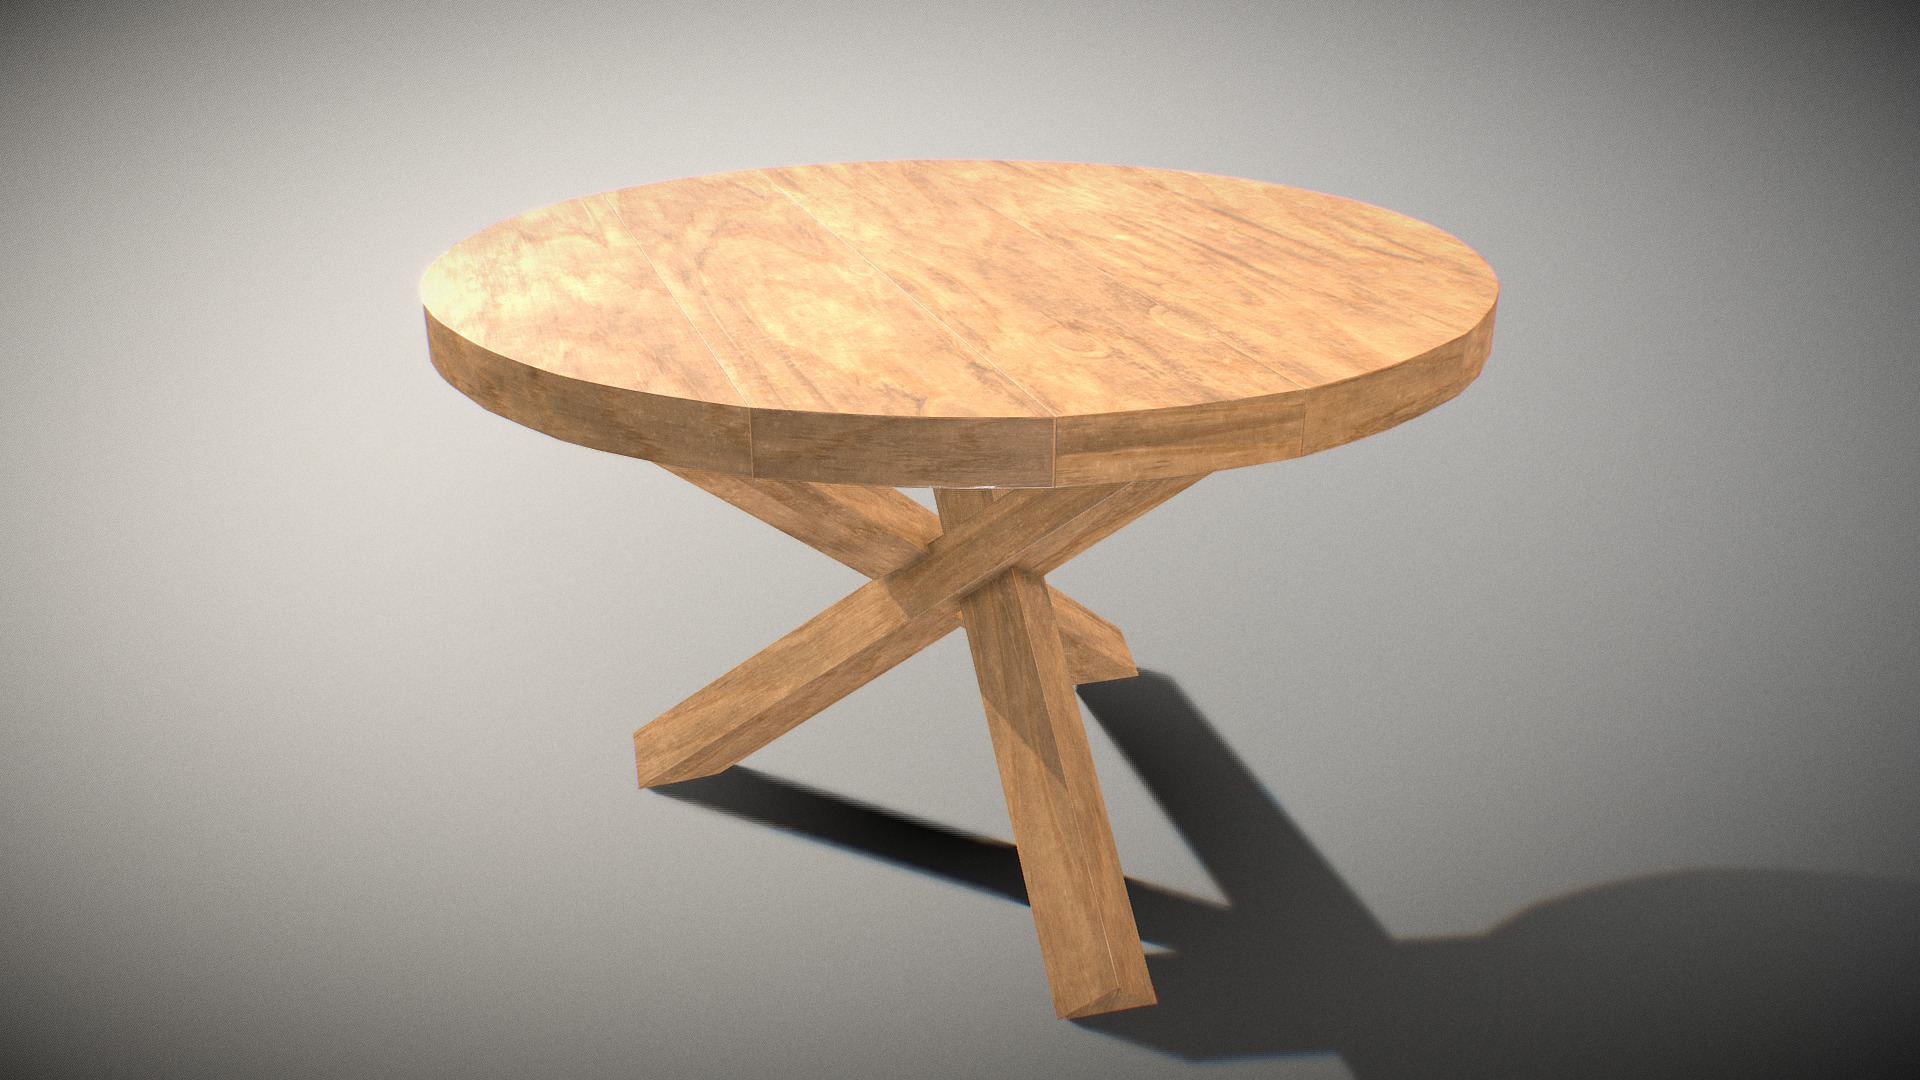 3D model Table wooden - This is a 3D model of the Table wooden. The 3D model is about a wooden table on a white background.